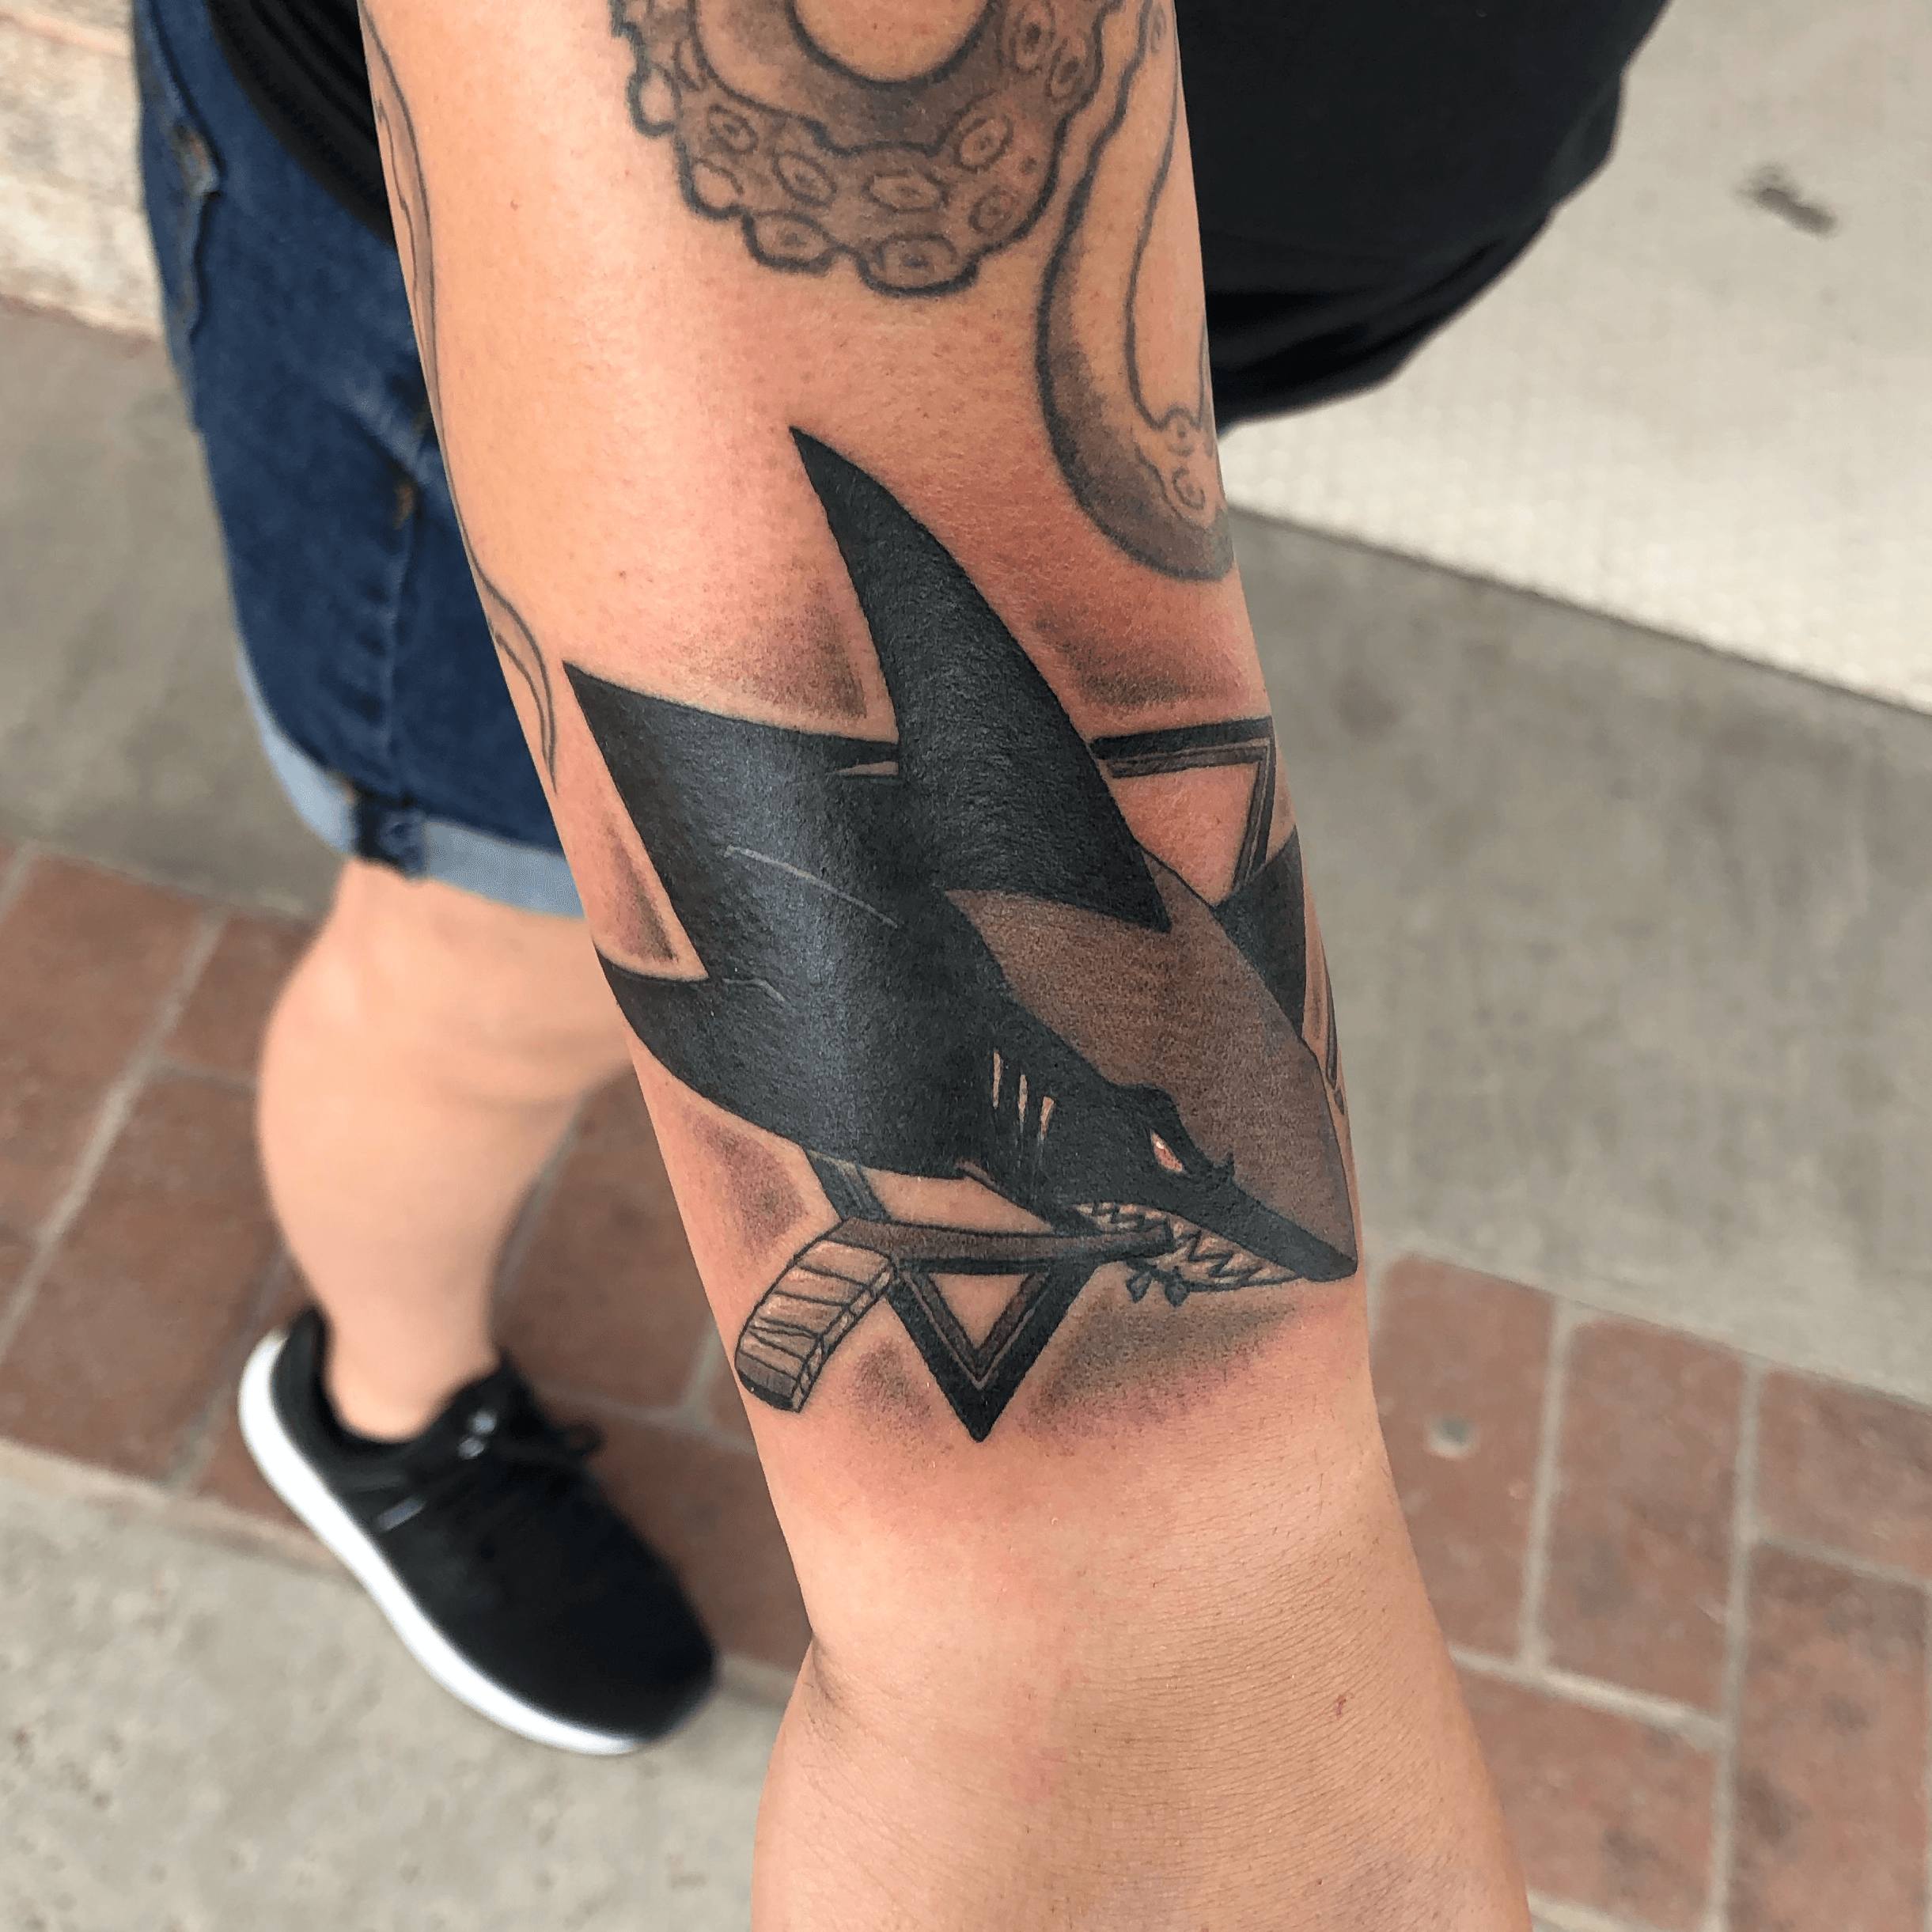 San Jose Tattoos  CHEERS FROM THE WASTELAND